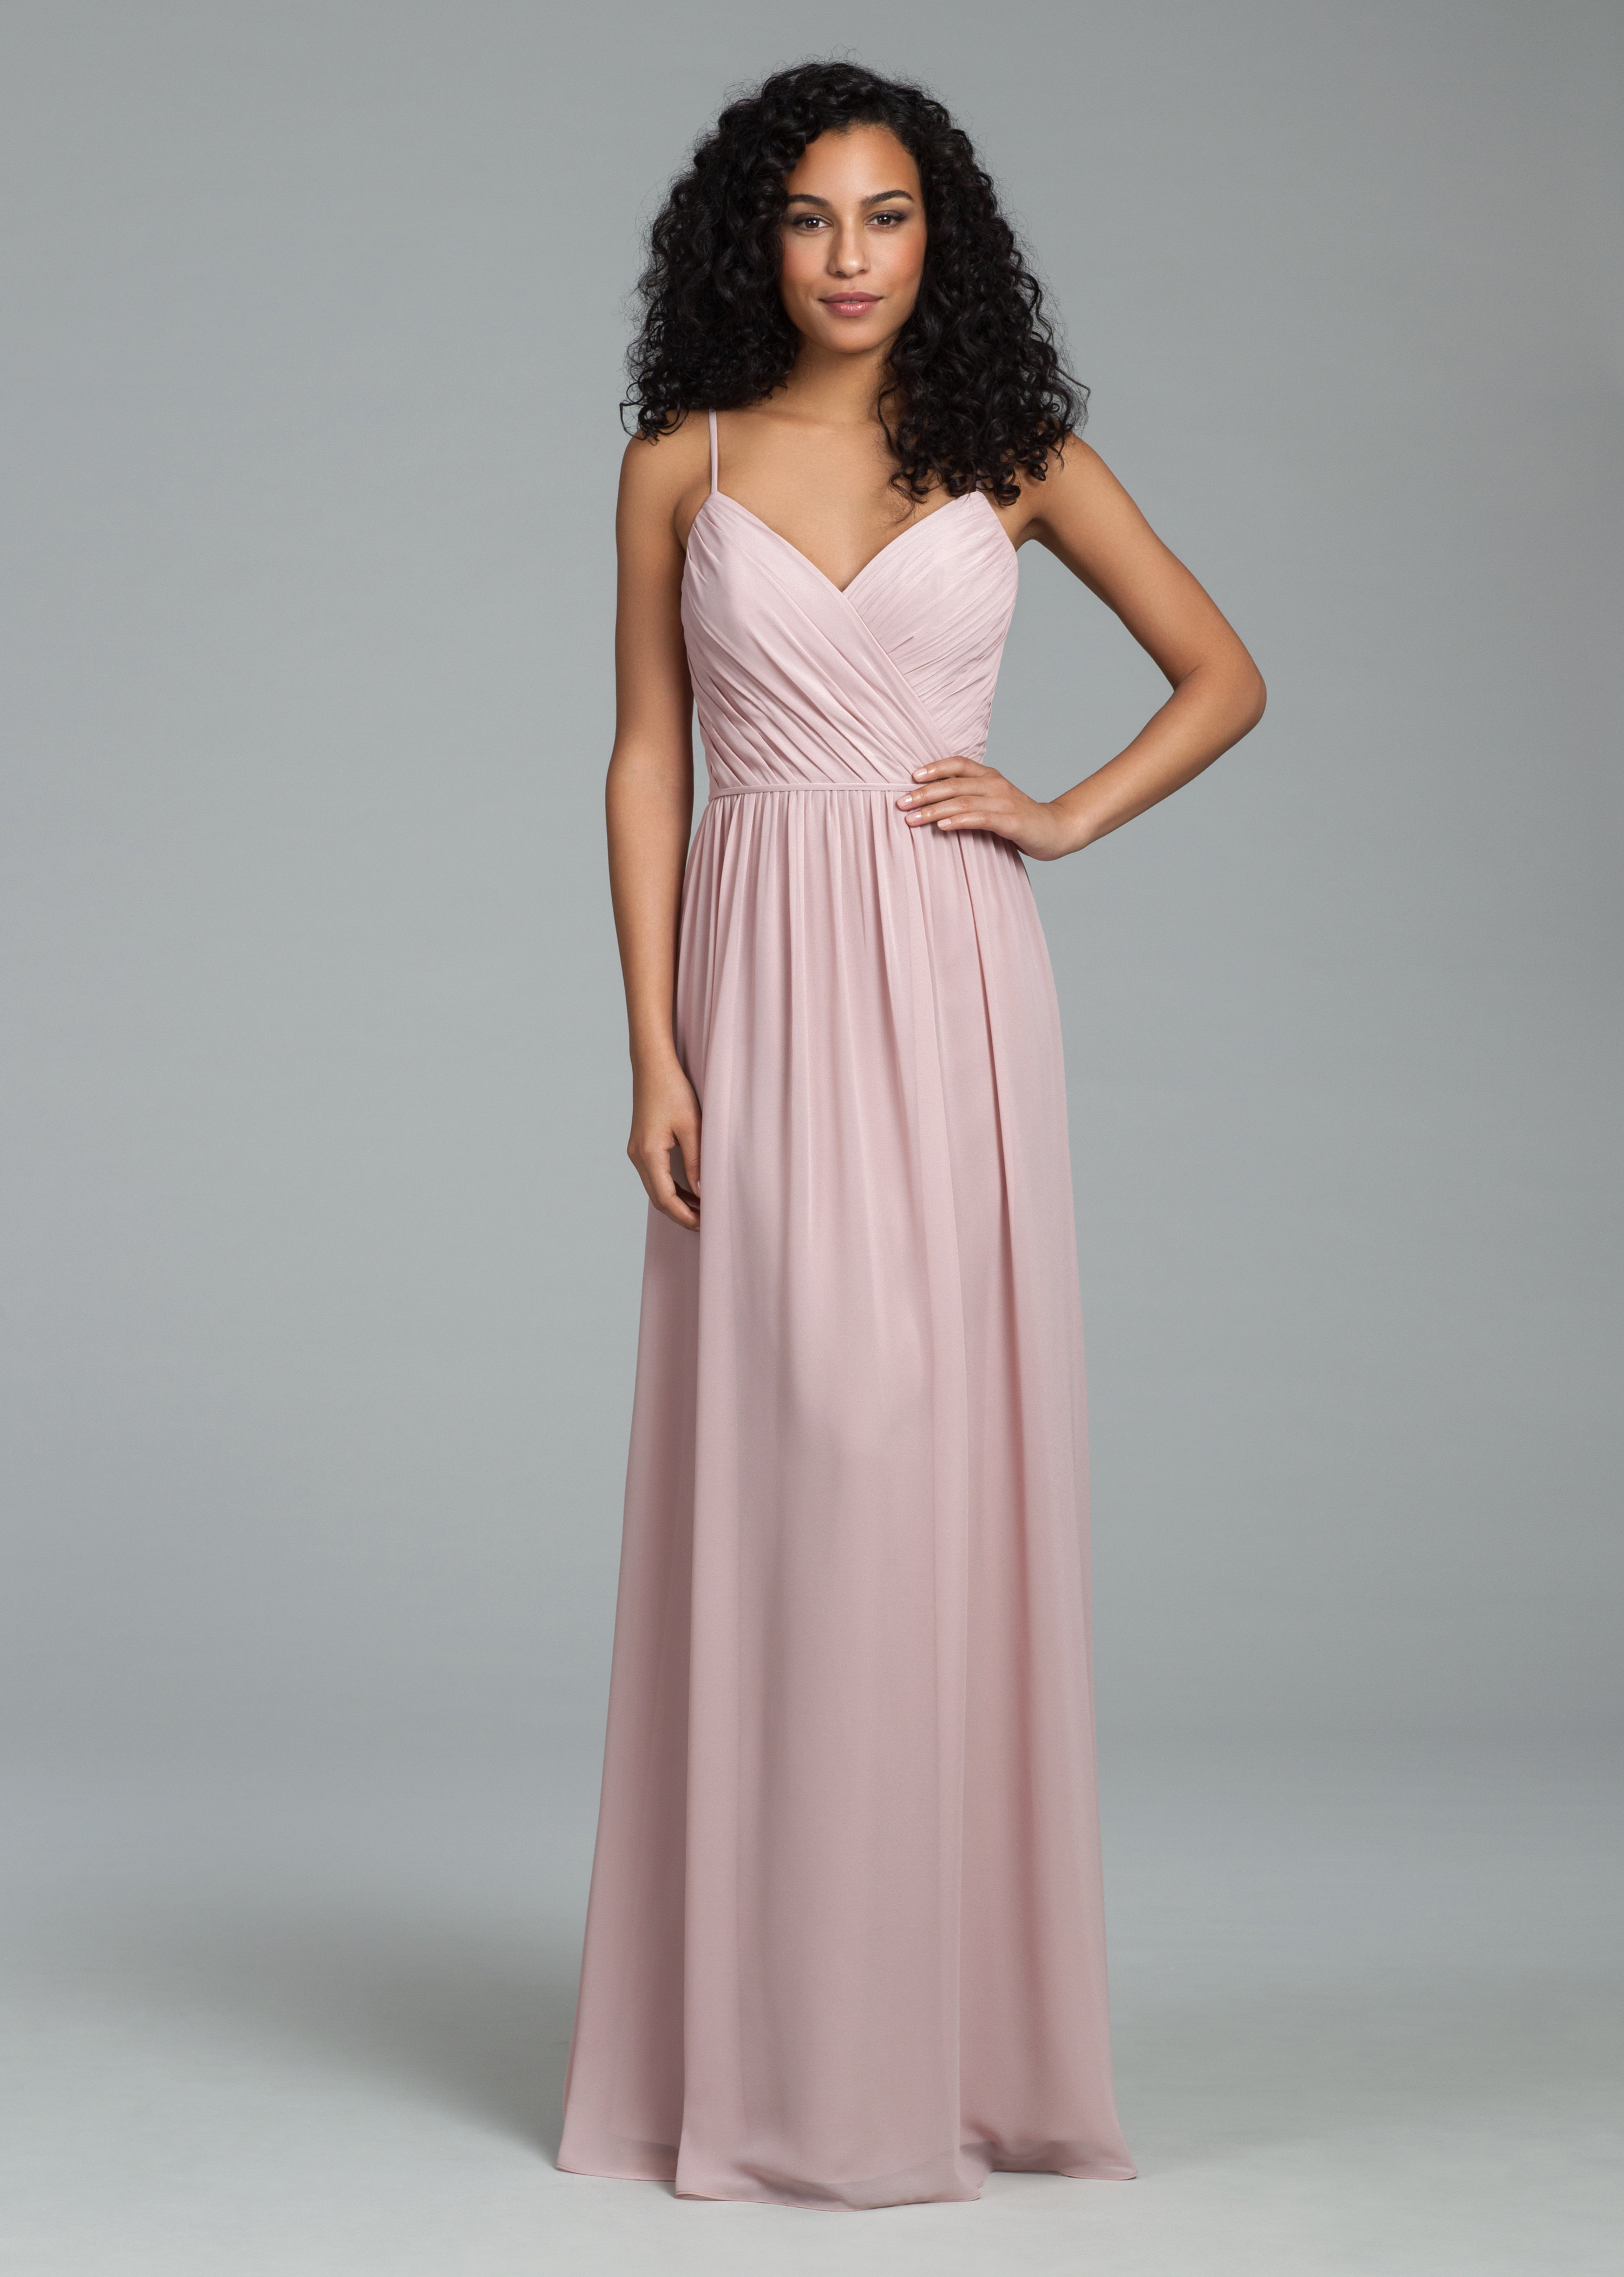 Details about  / Hayley Paige Occasions dusty rose bridesmaid gown Size 12